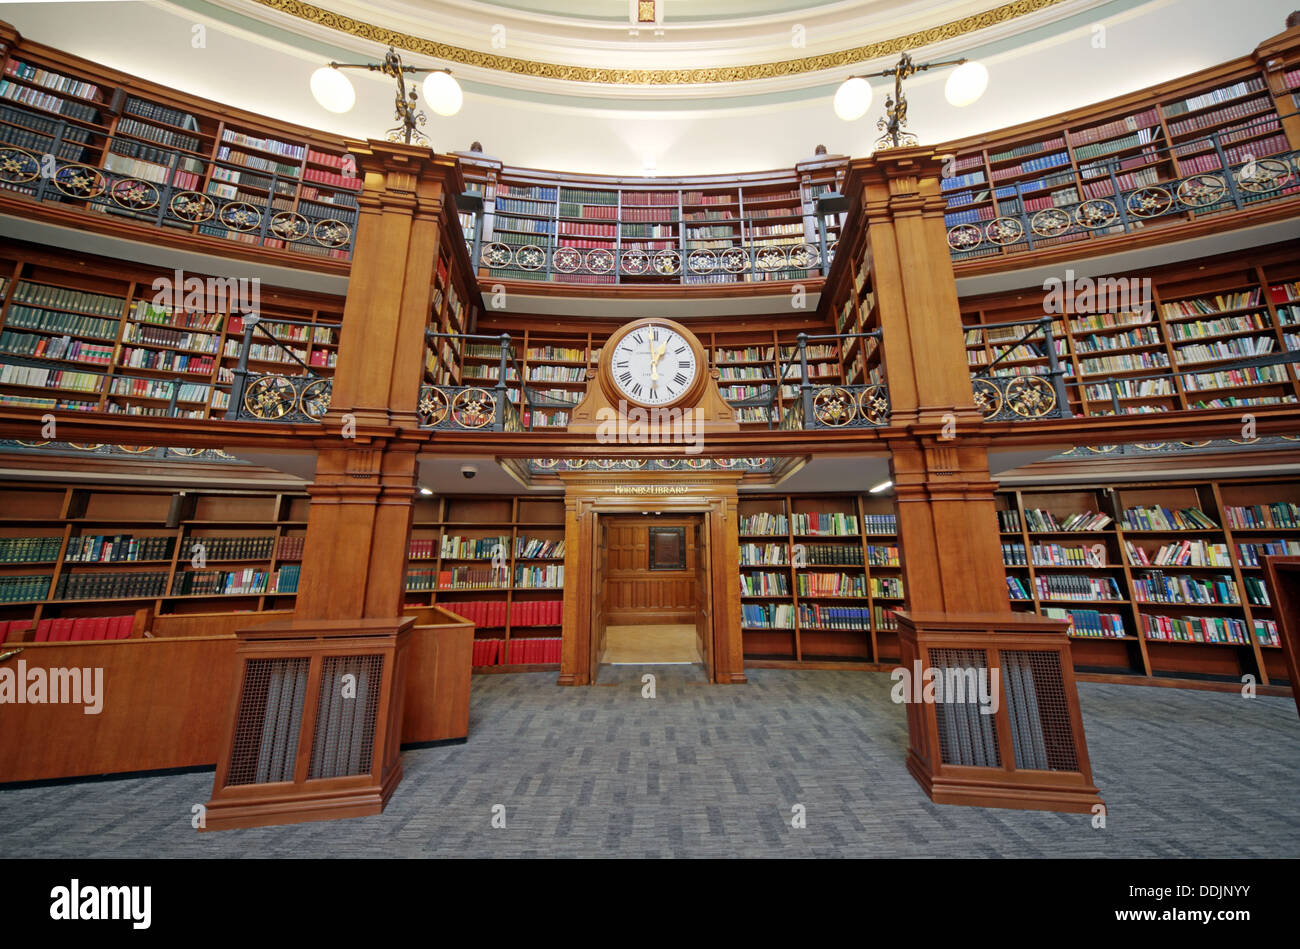 Clock over door to Honby library, Liverpool central library Picton reading rooms Stock Photo